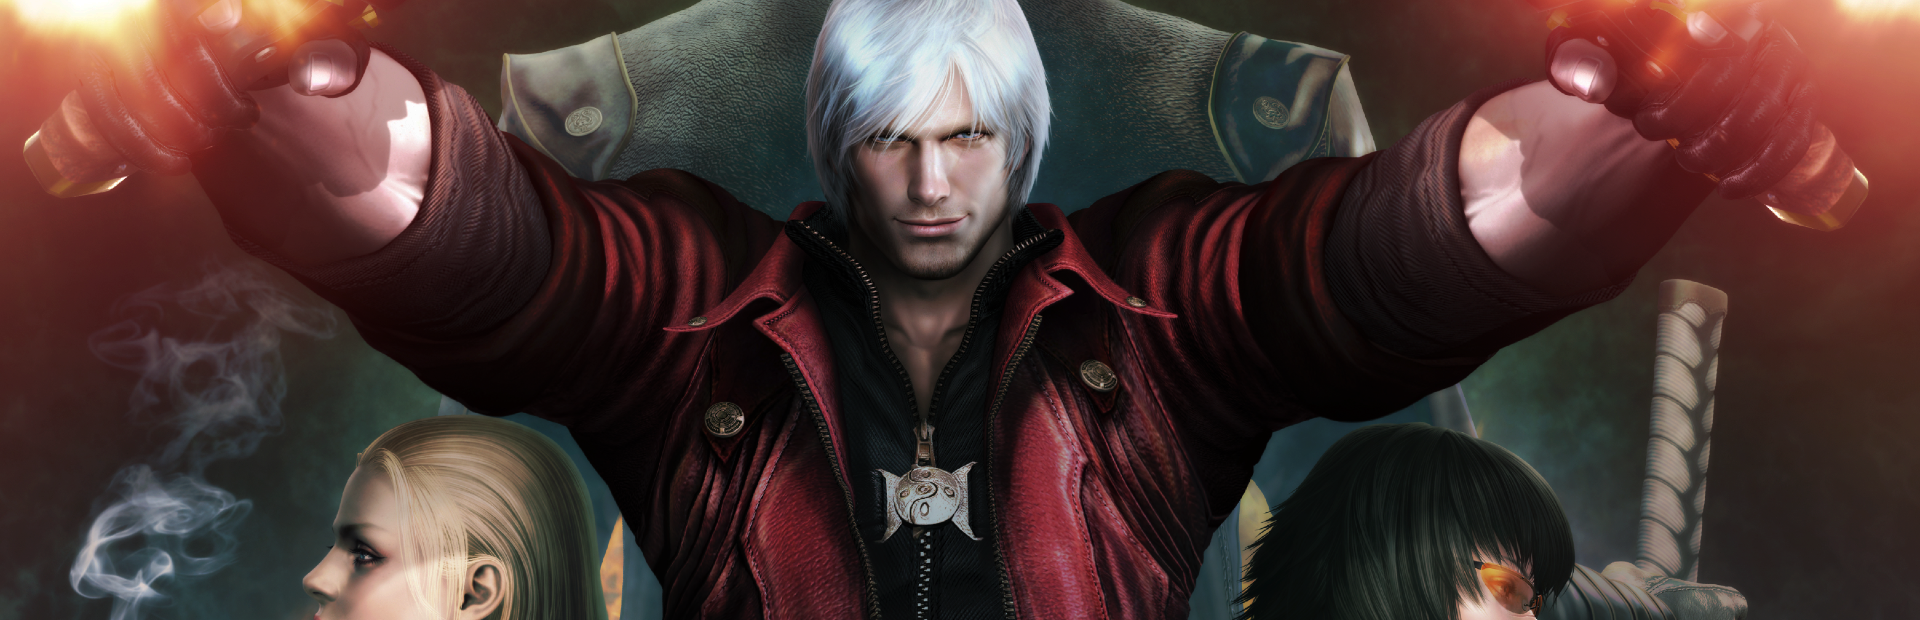 Devil May Cry 4 on Steam